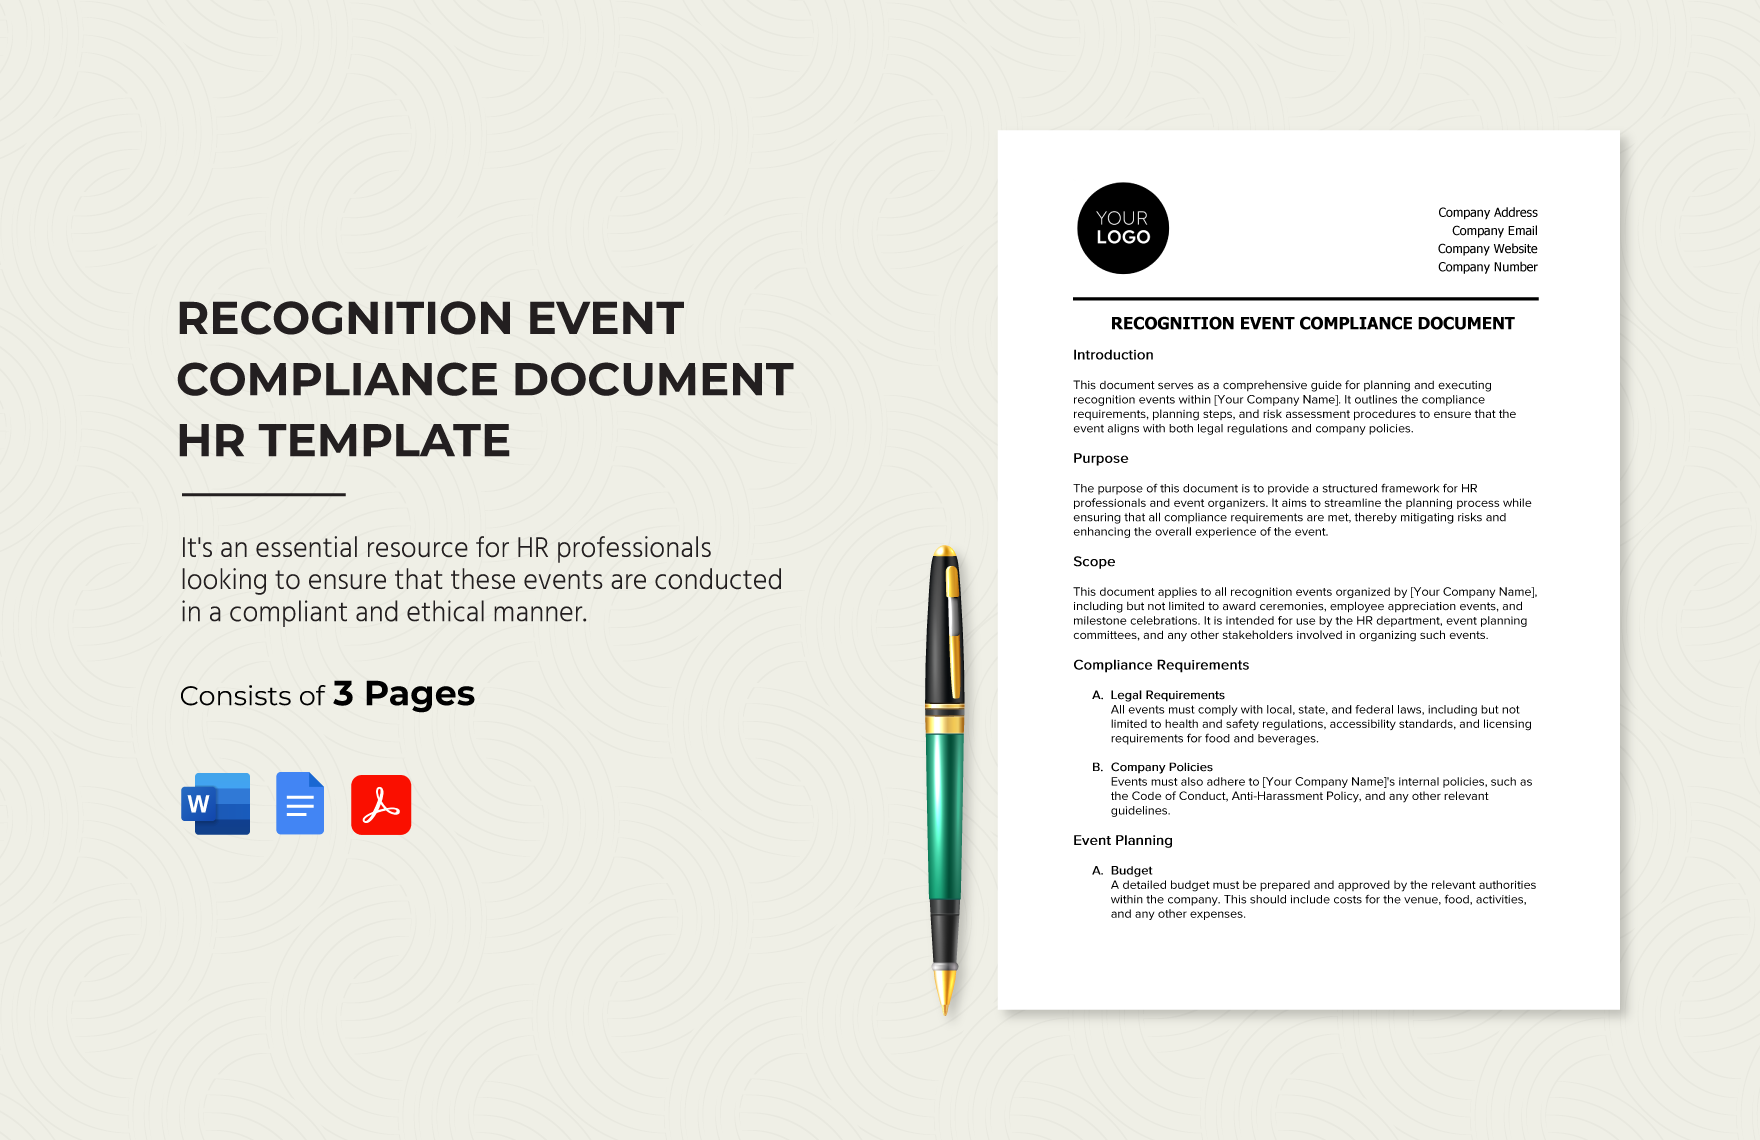 Recognition Event Compliance Document HR Template in Word, Google Docs, PDF